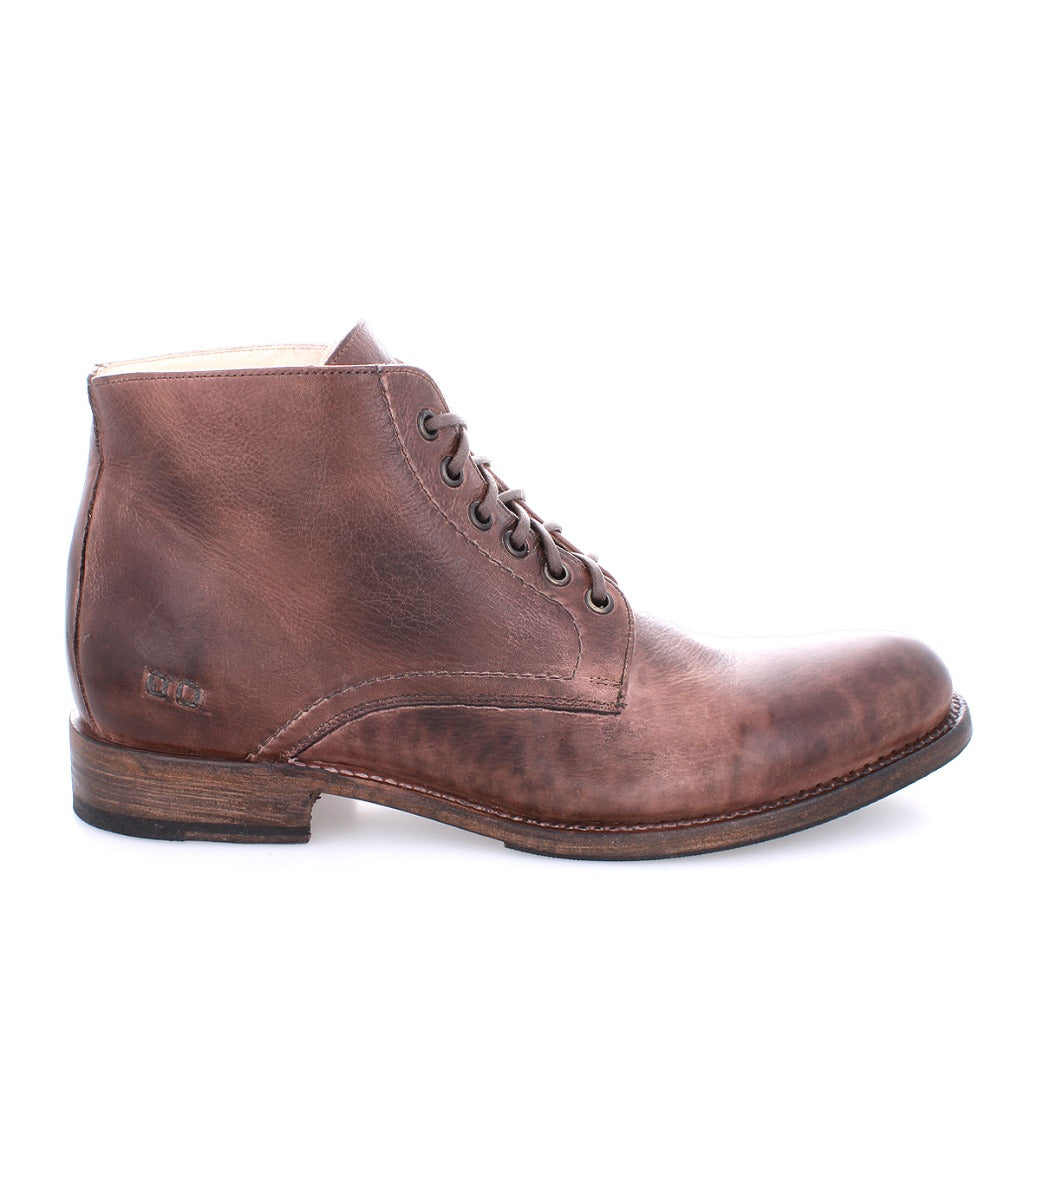 A single Bed Stu Bradley Black Rustic boot with laces on a white background.